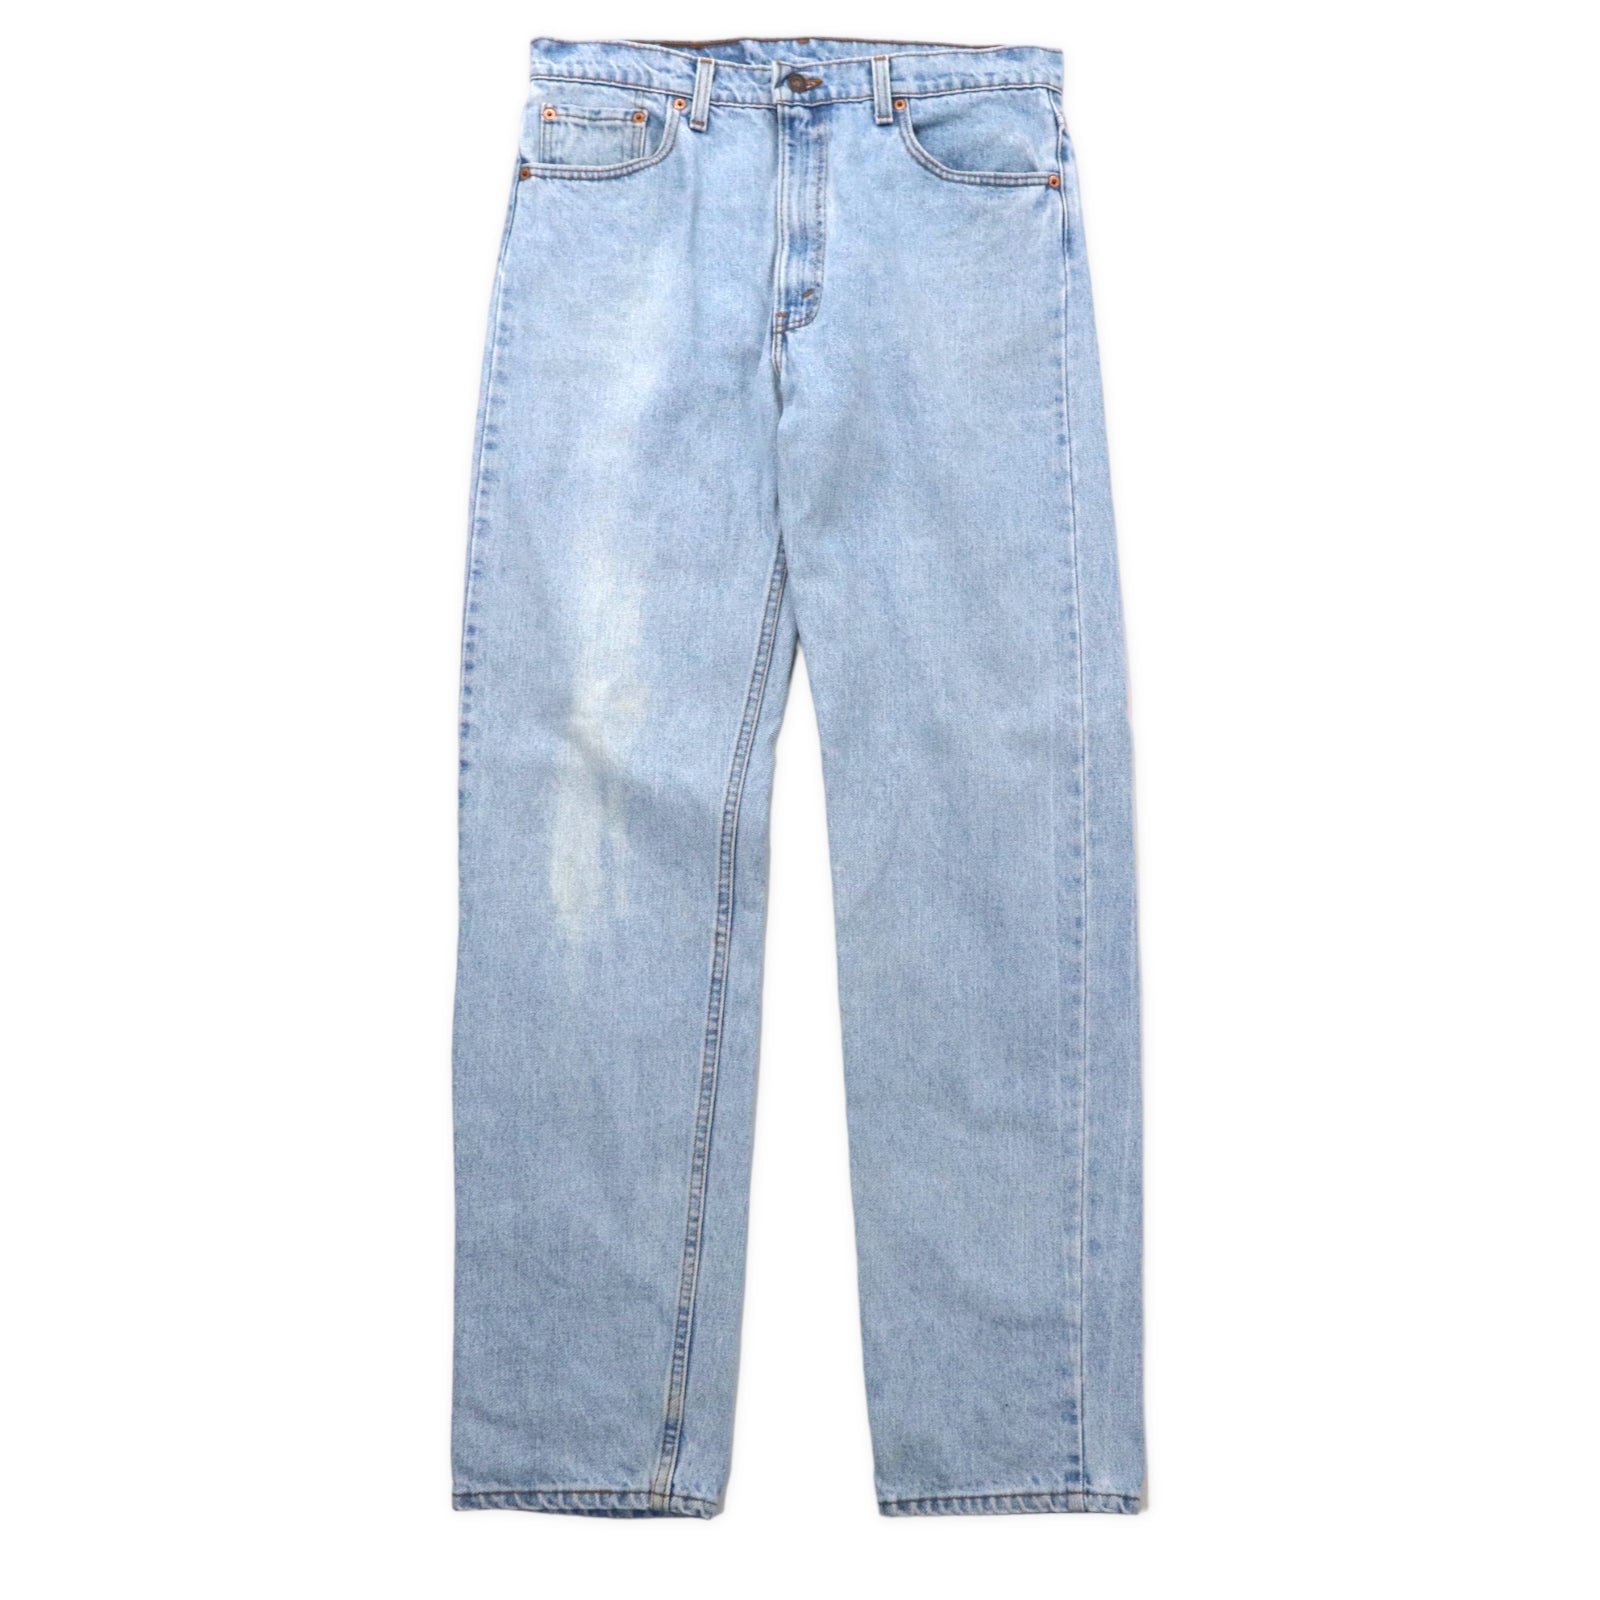 Levi's USA MADE 90s 505 Tapered Denim Pants 36 Blue Ice Wash 505 ...